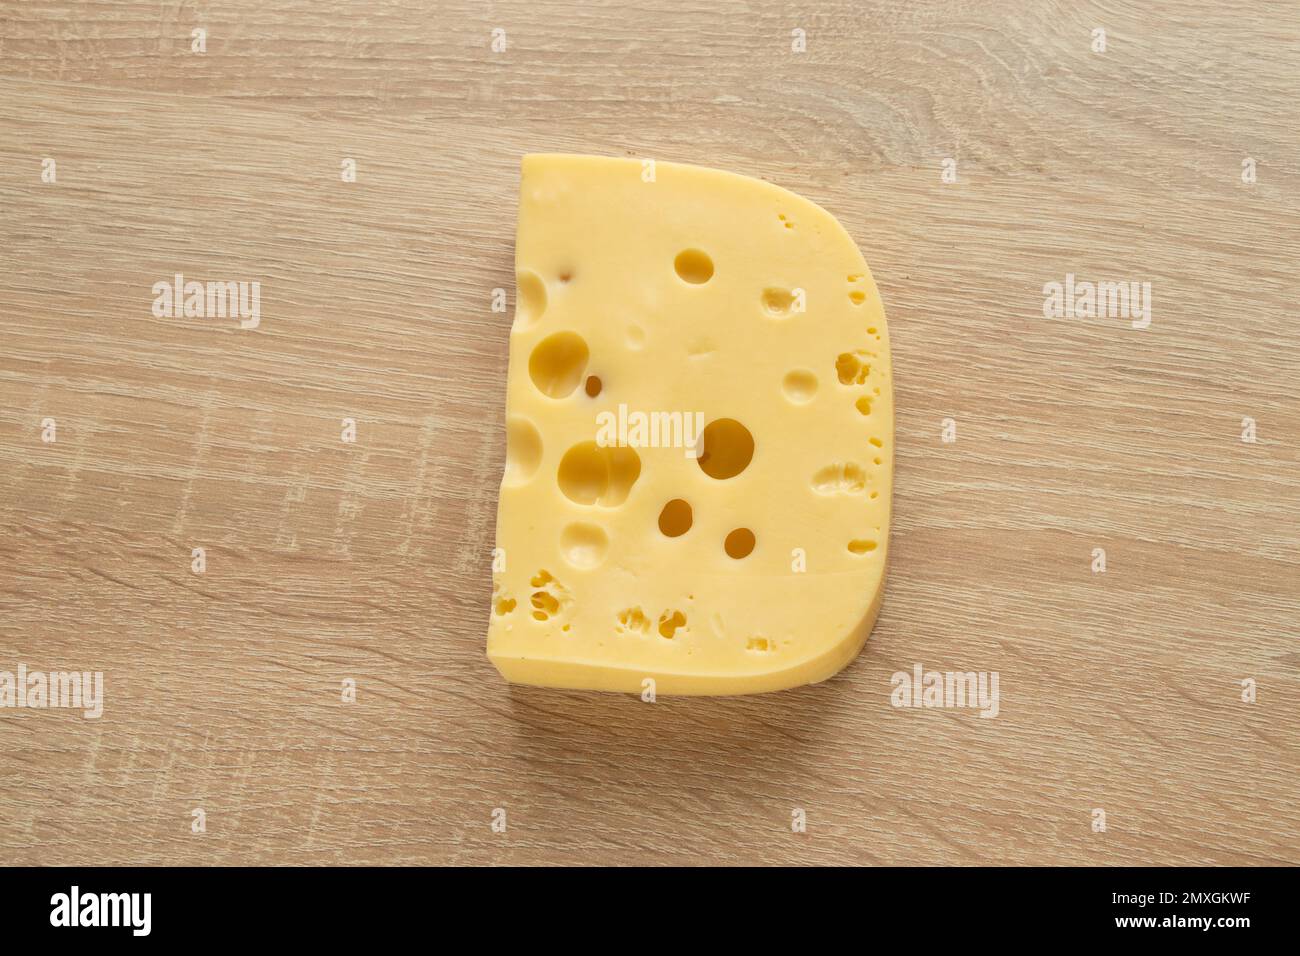 piece of cheese on a wooden background close-up Stock Photo